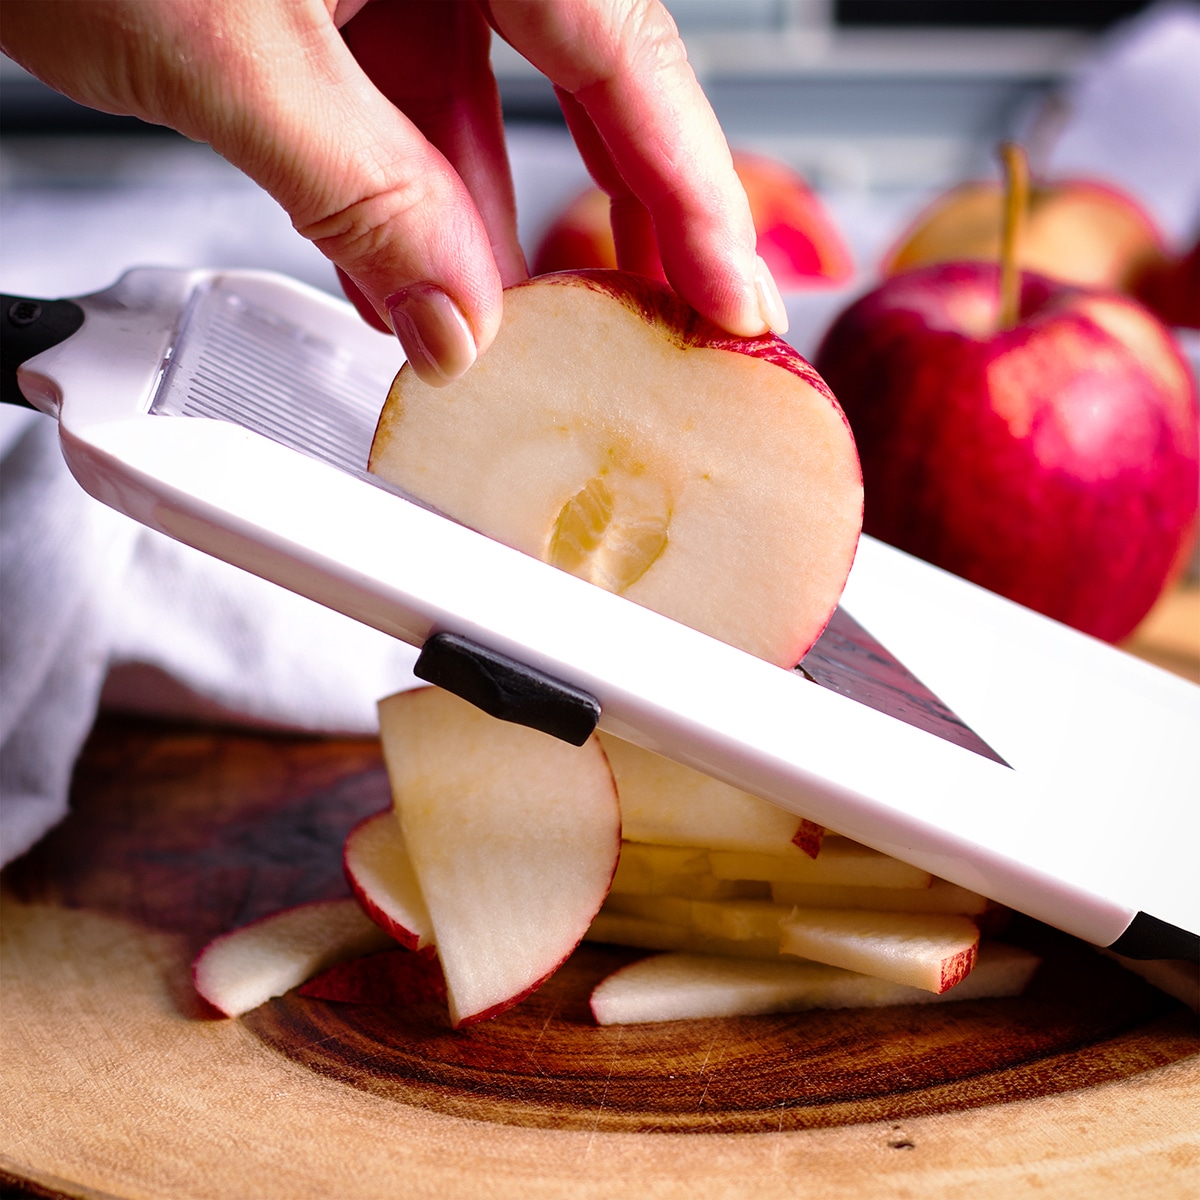 Someone using a mandolin to slice apples into thin slices.